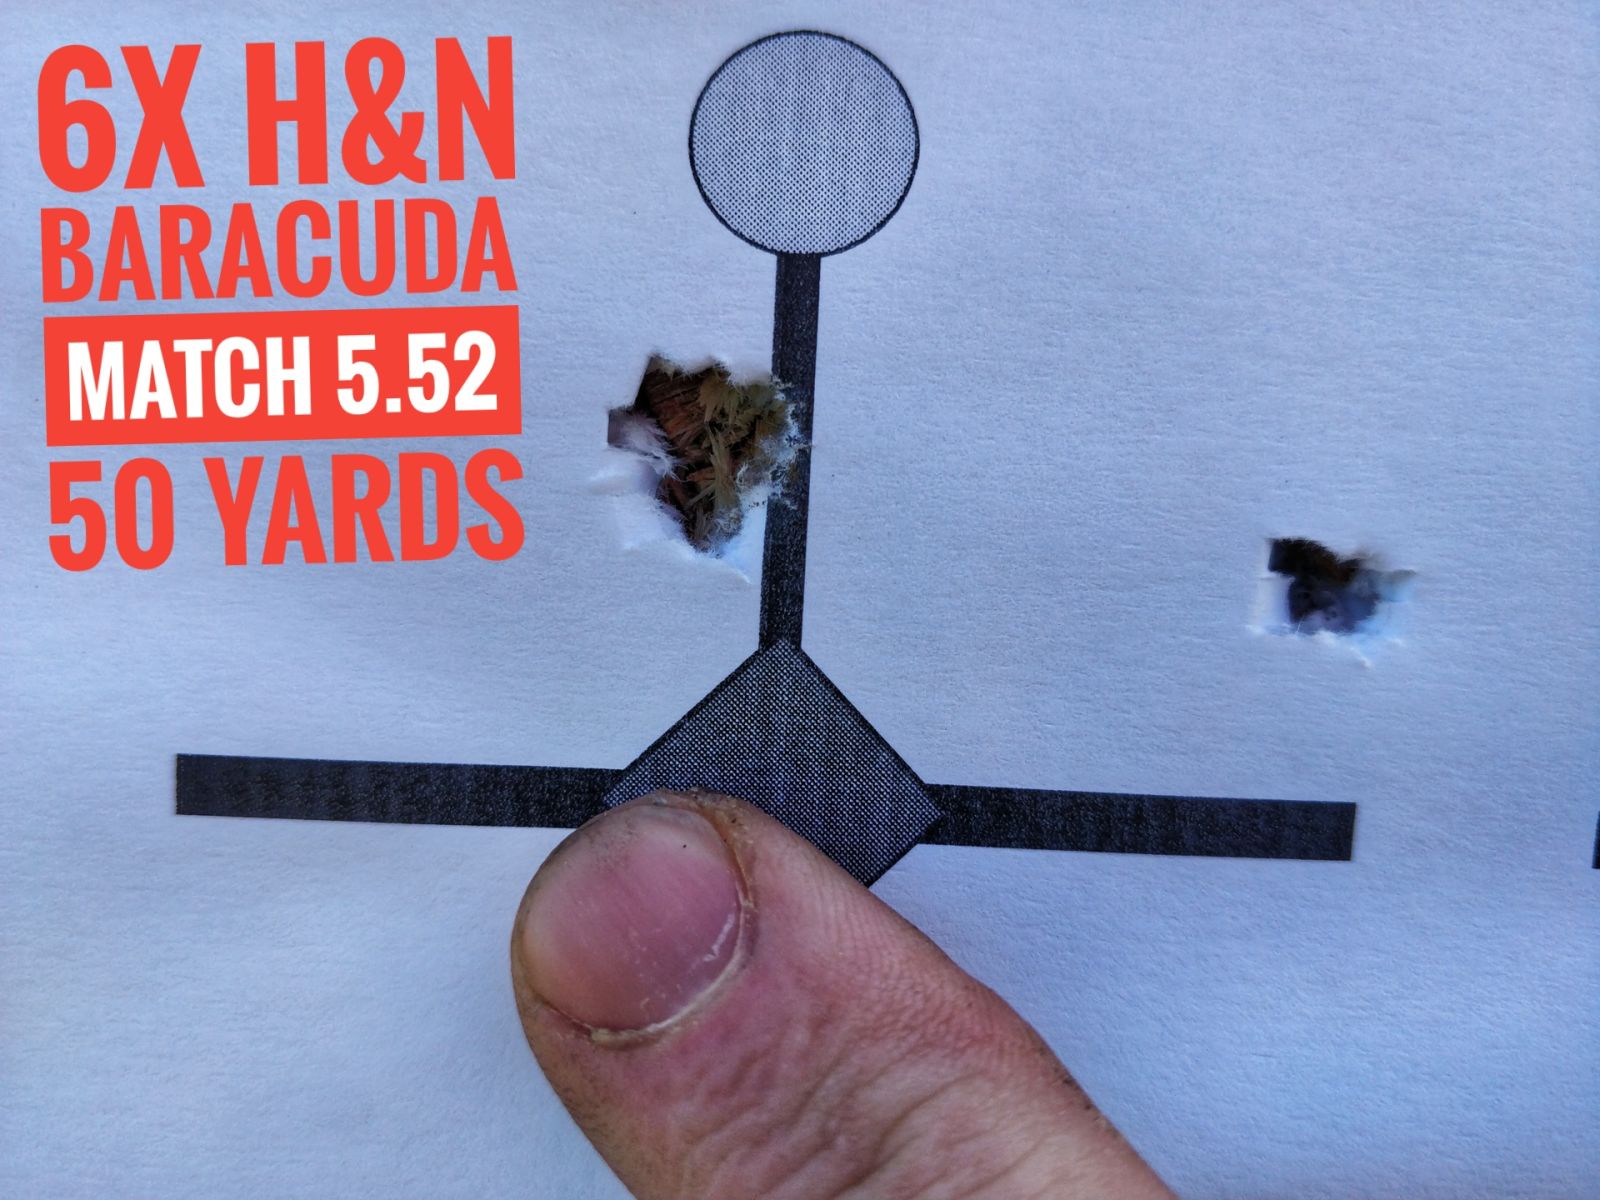 Man this thing LOVES Baracuda Match 5.52&#39;s. I think the flyer was my fault, as Baracudas are usually super consistent. 